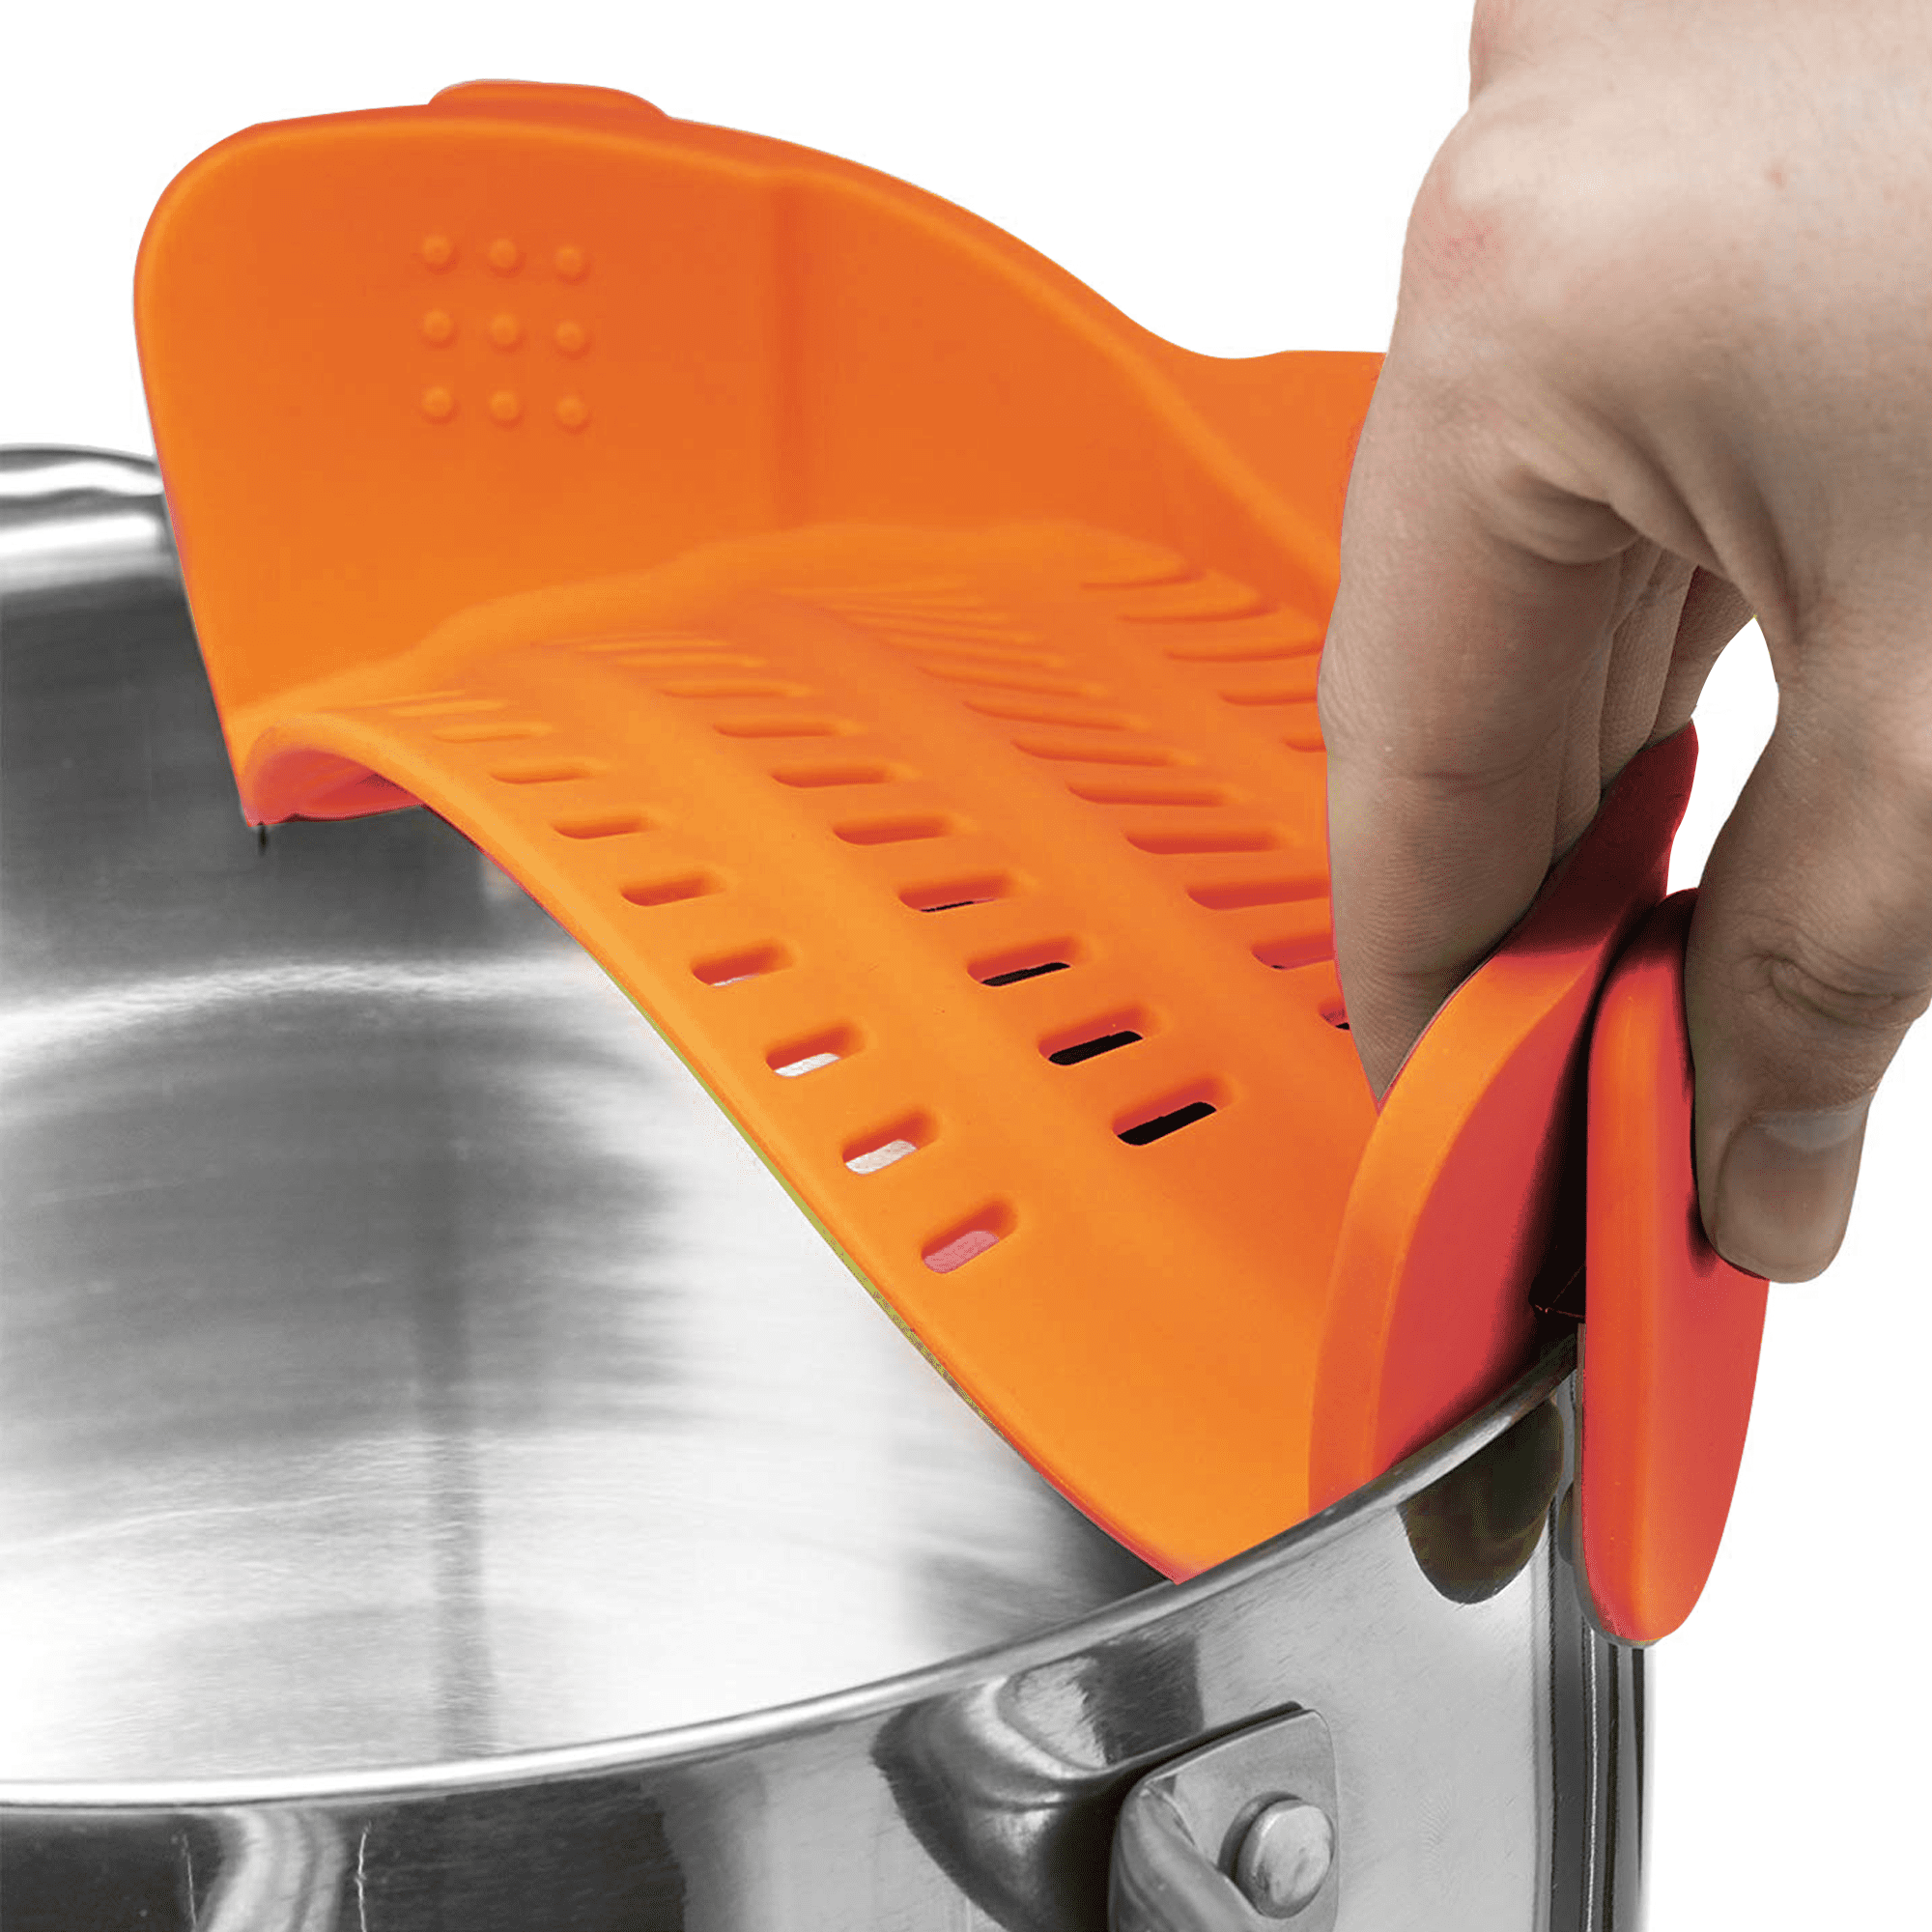 The Original SNAP'N STRAIN by Kitchen Gizmo, No-hands No-Fuss Clip-On –  Kitchen Hobby